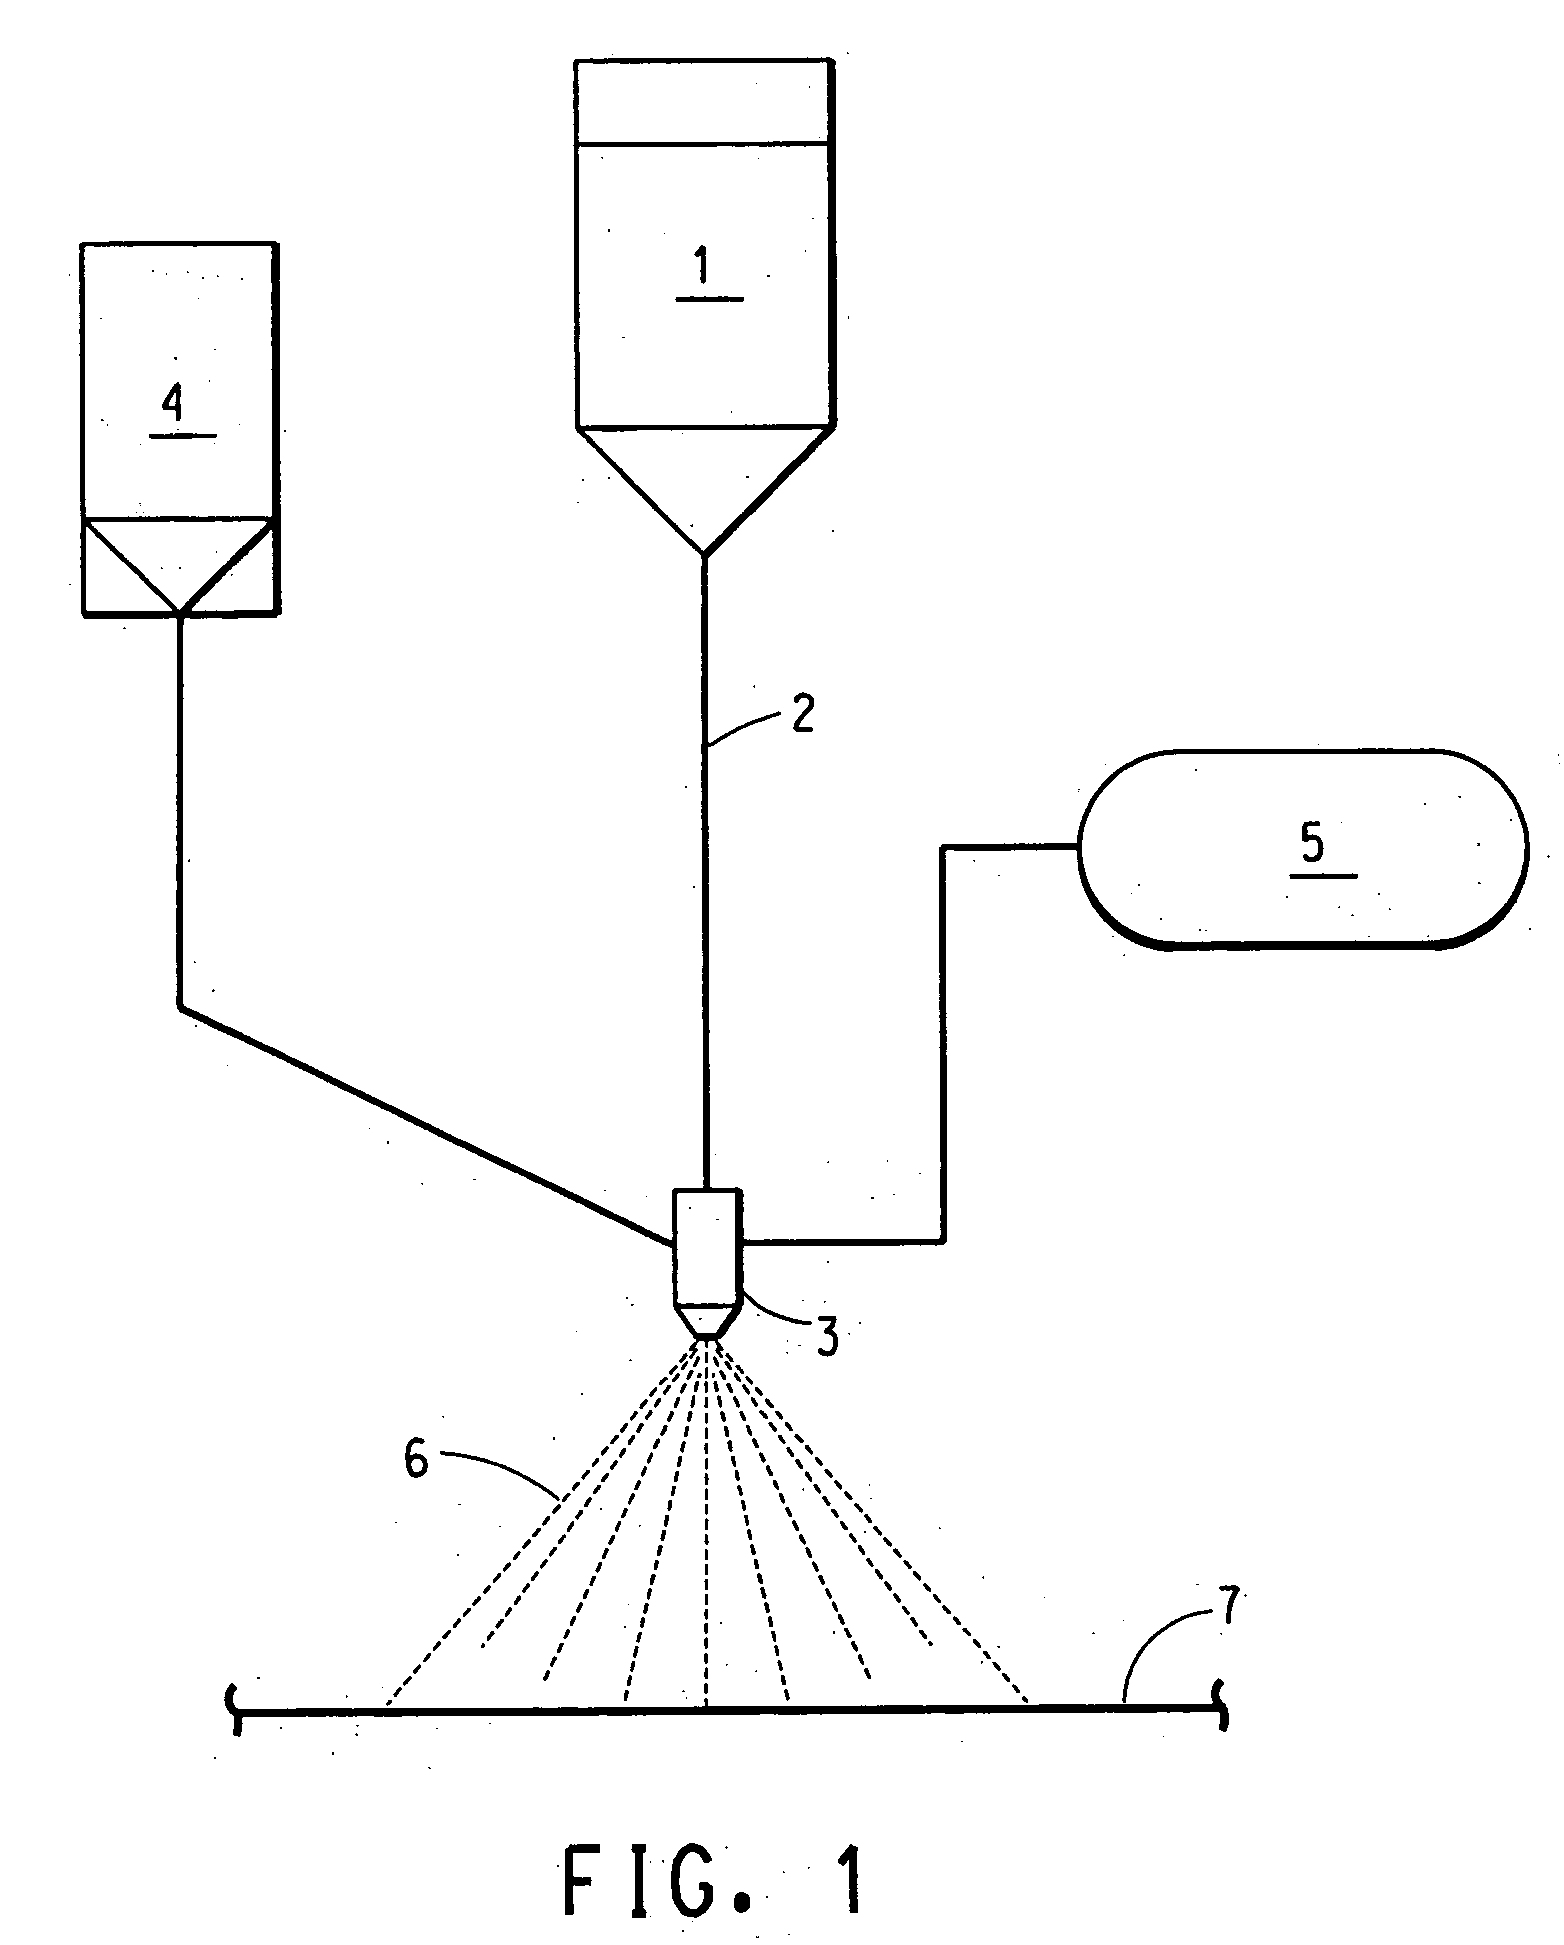 Dust suppression method and apparatus